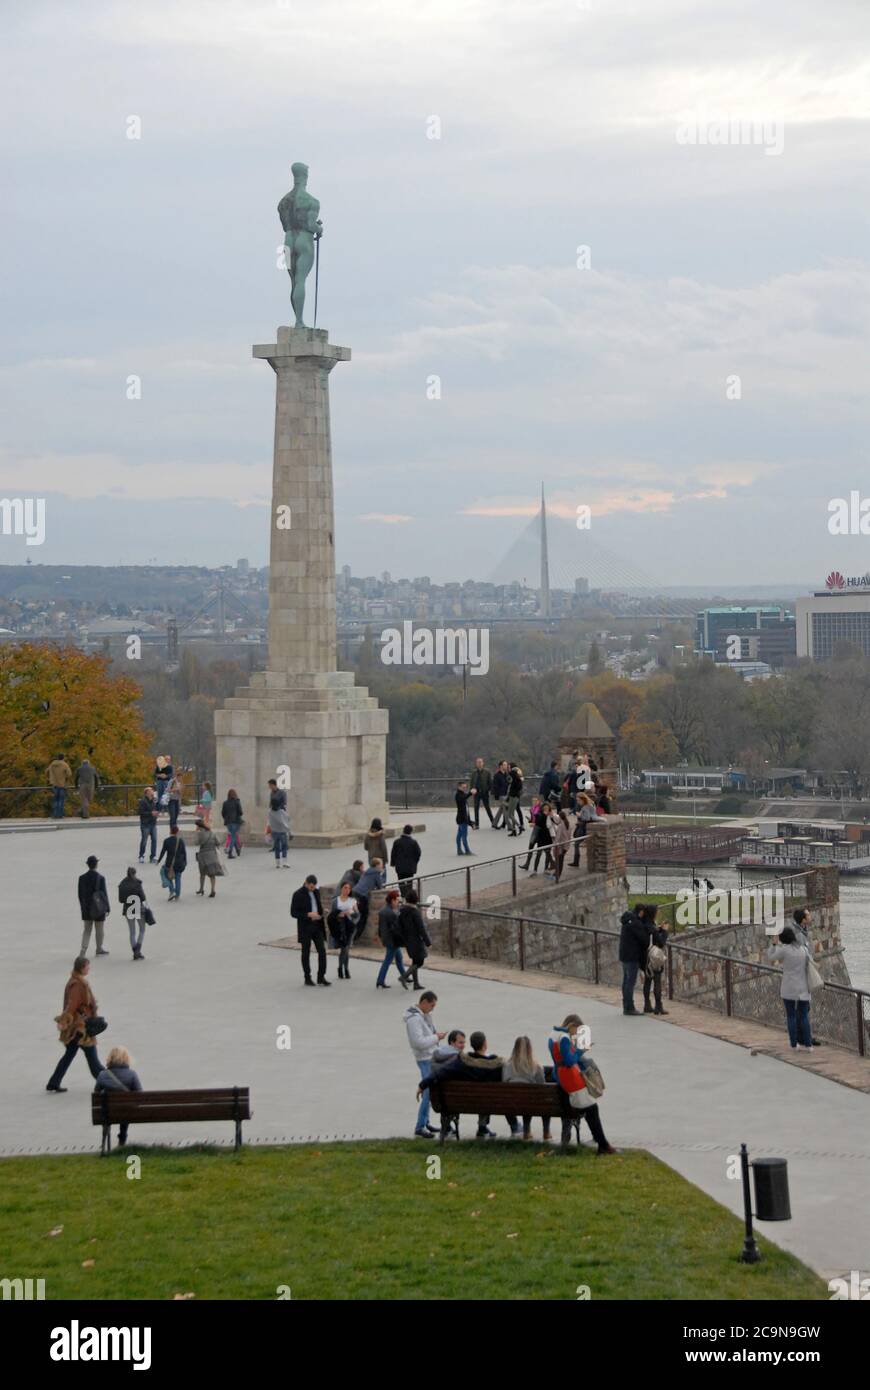 Belgrade in Serbia. Pobednik or The Victor is a victory monument in Kalemagdan Park near Belgrade Fortress. Stock Photo